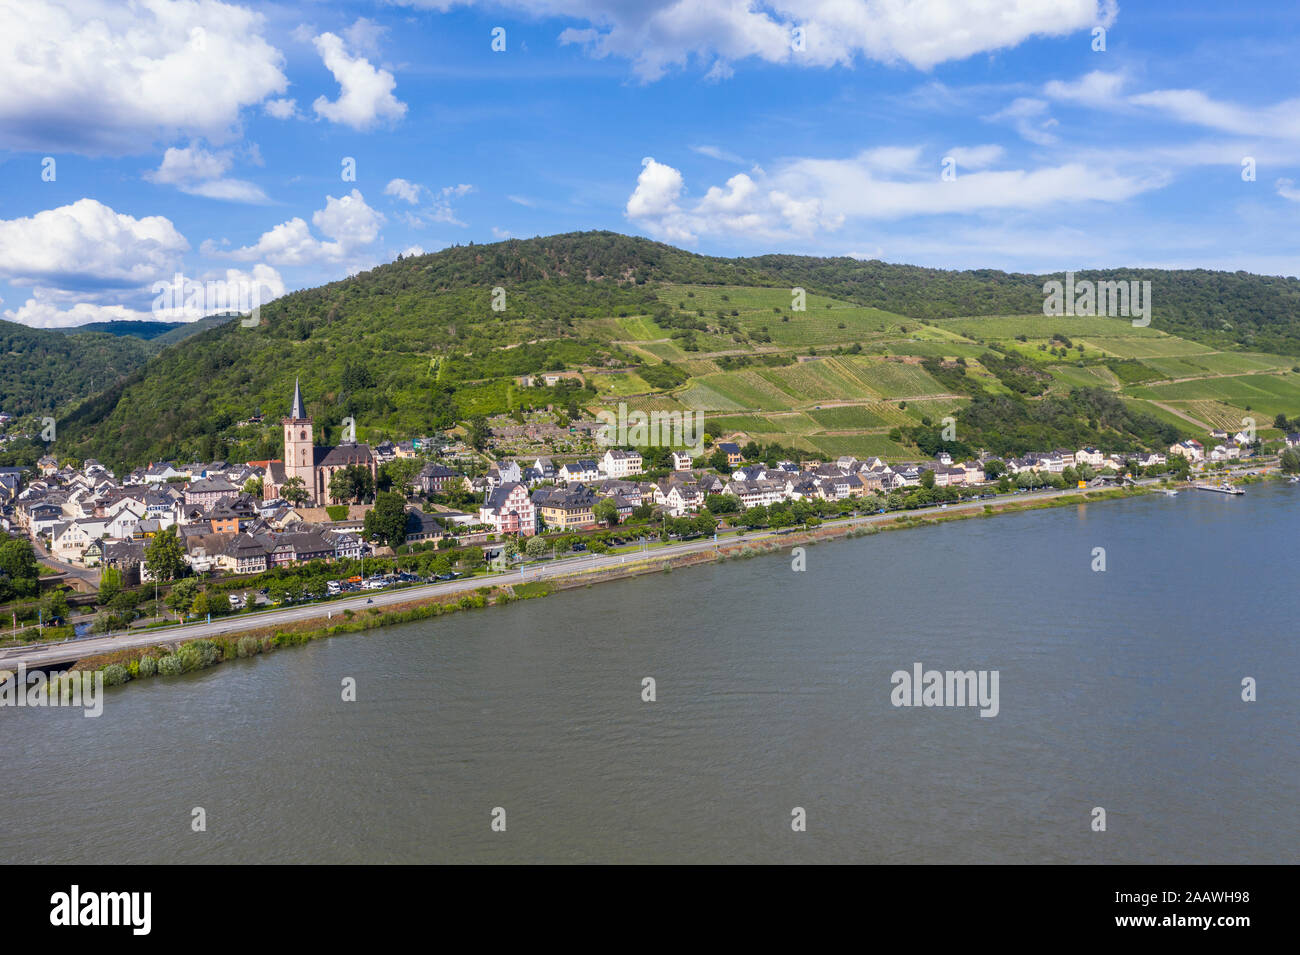 Aerial view of mountain by Rhine River against sky in Lorch, Germany Stock Photo